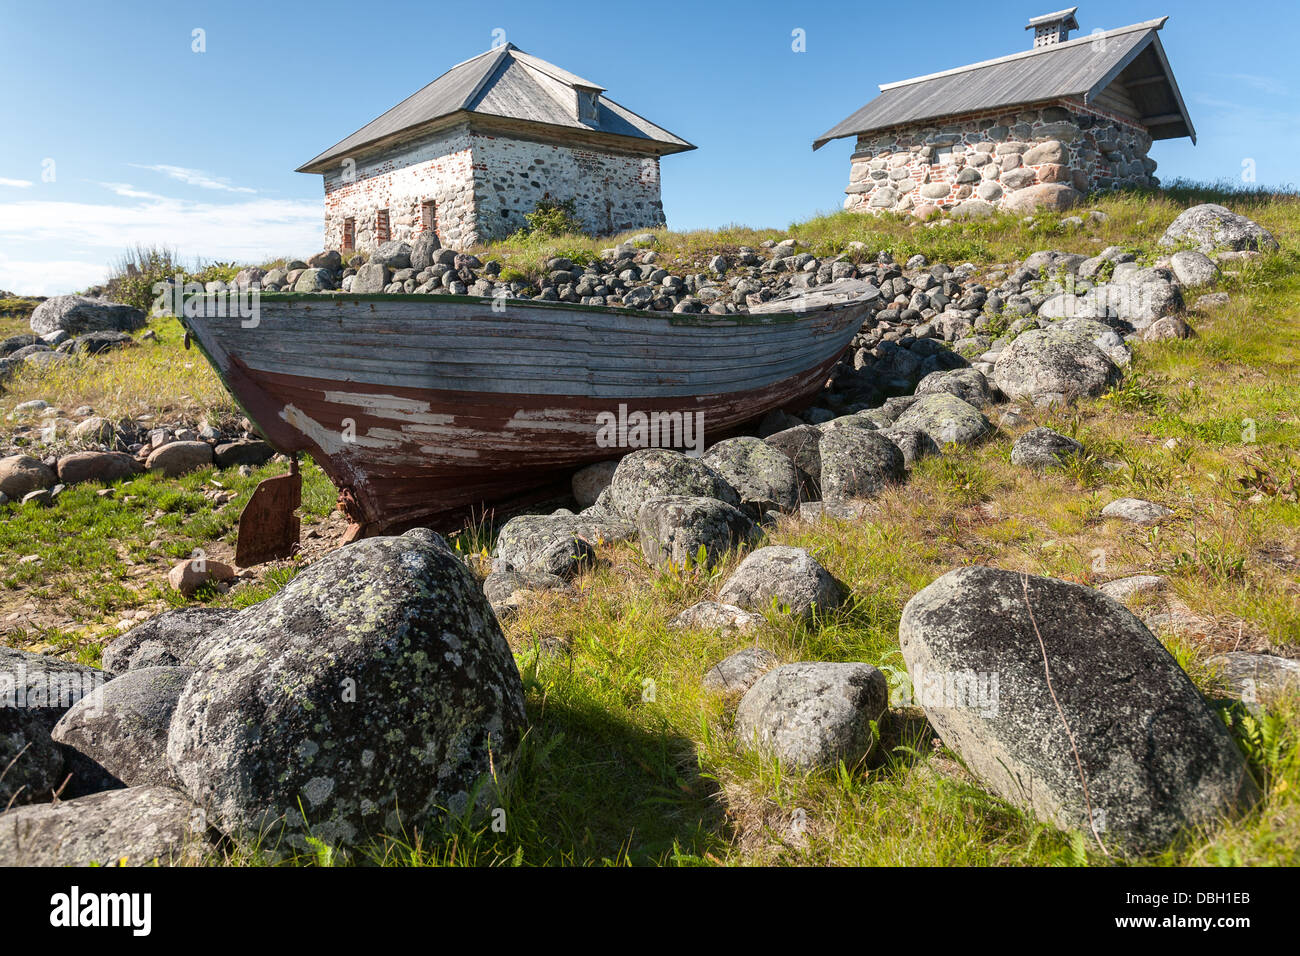 Old boat and stone houses. Stock Photo